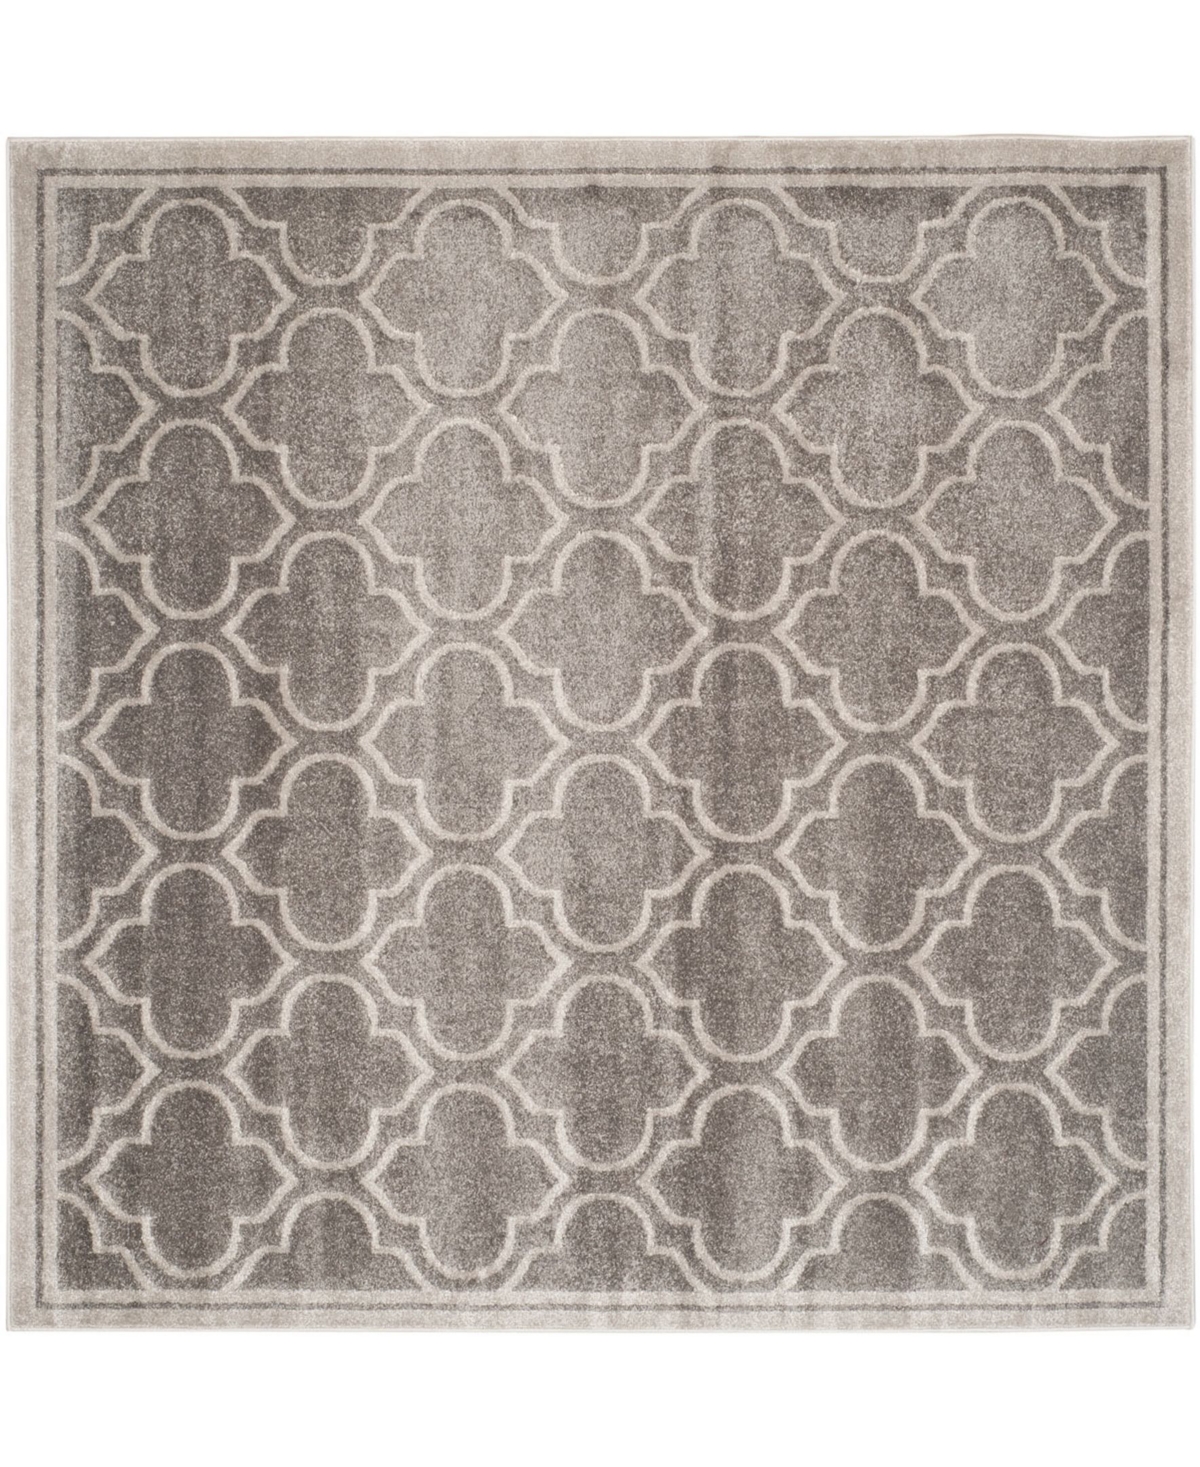 Safavieh Amherst Gray and Light Gray 9' x 9' Square Area Rug - Gray